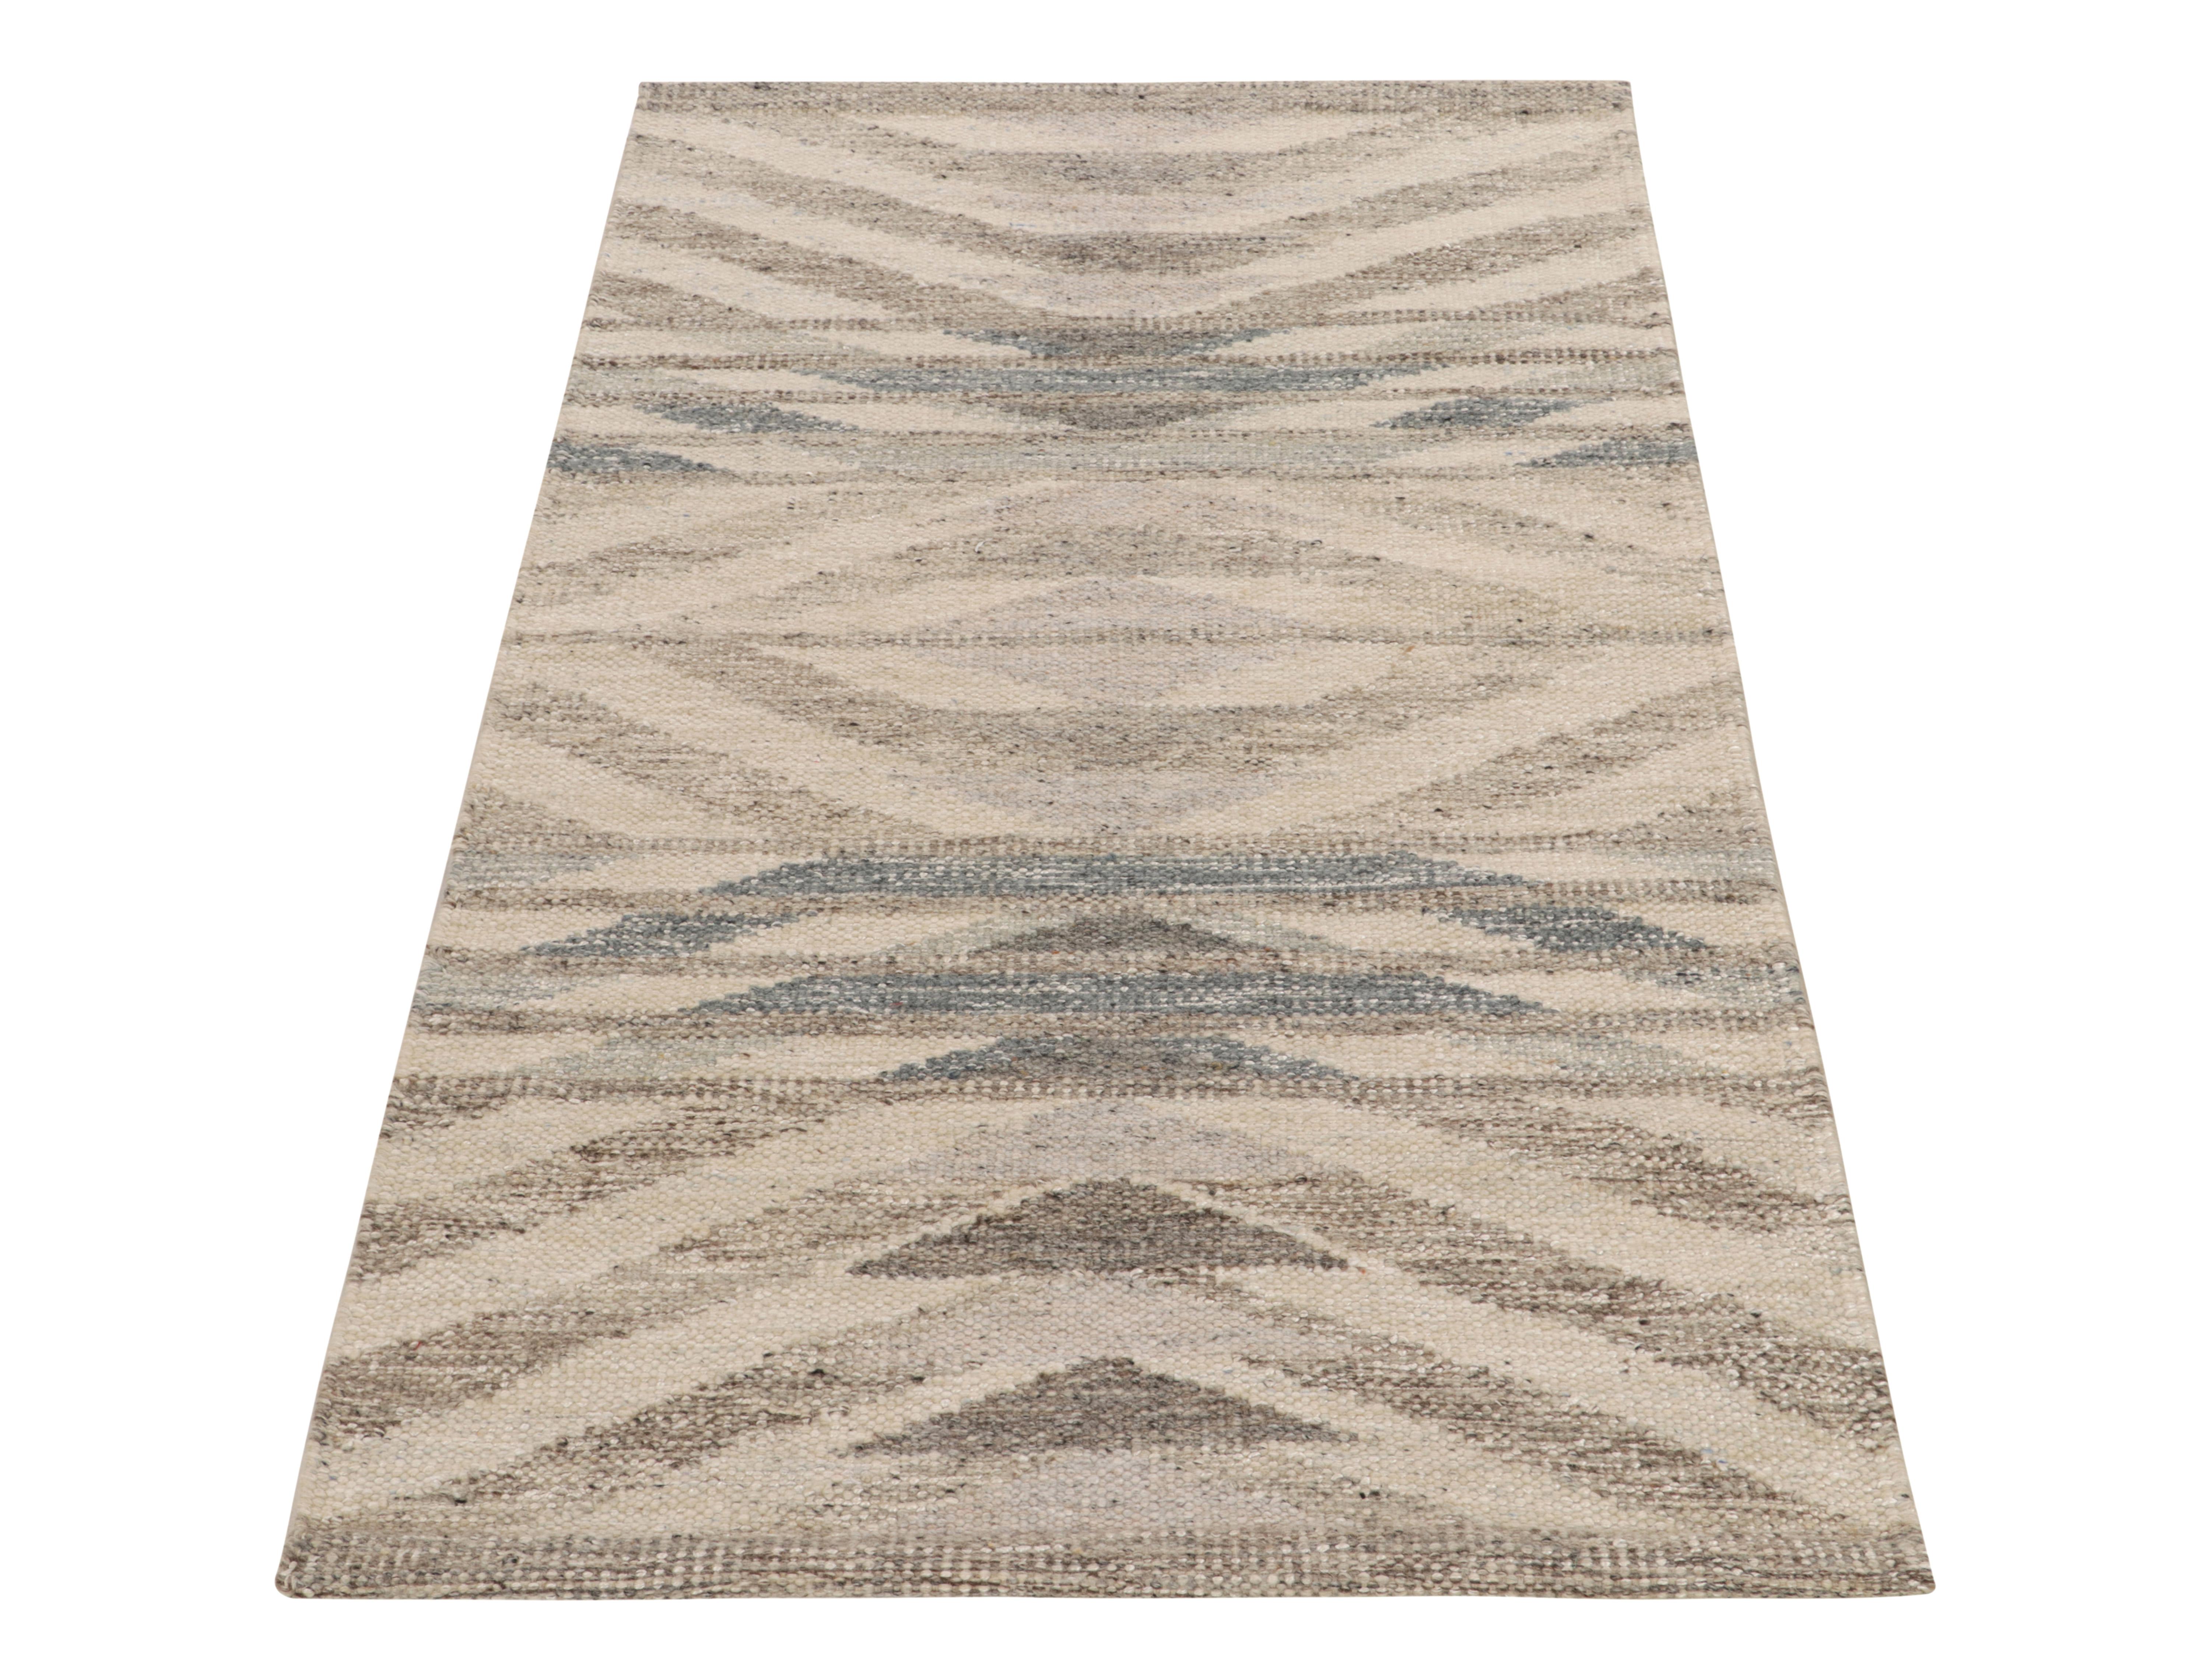 Handwoven in wool, a contemporary take on mid-century Swedish flatweaves from Rug & Kilim’s acclaimed Scandinavian collection. The 3x5 kilim enjoys a repetitive geometric pattern in beige, gray & blue, complemented by a blend of undyed natural yarns